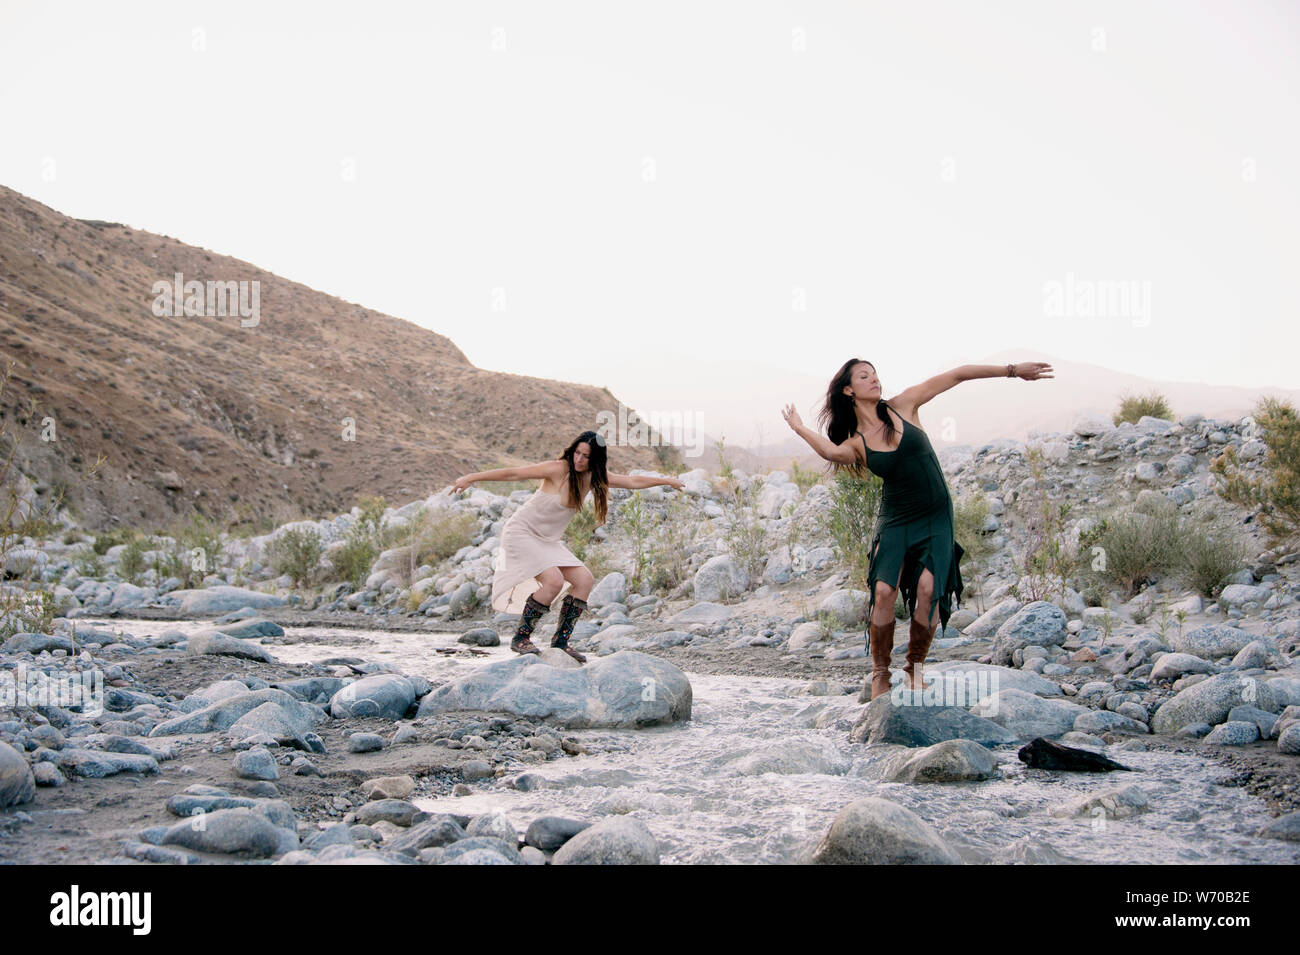 Beautiful wild women dancing freely with the desert river. Stock Photo